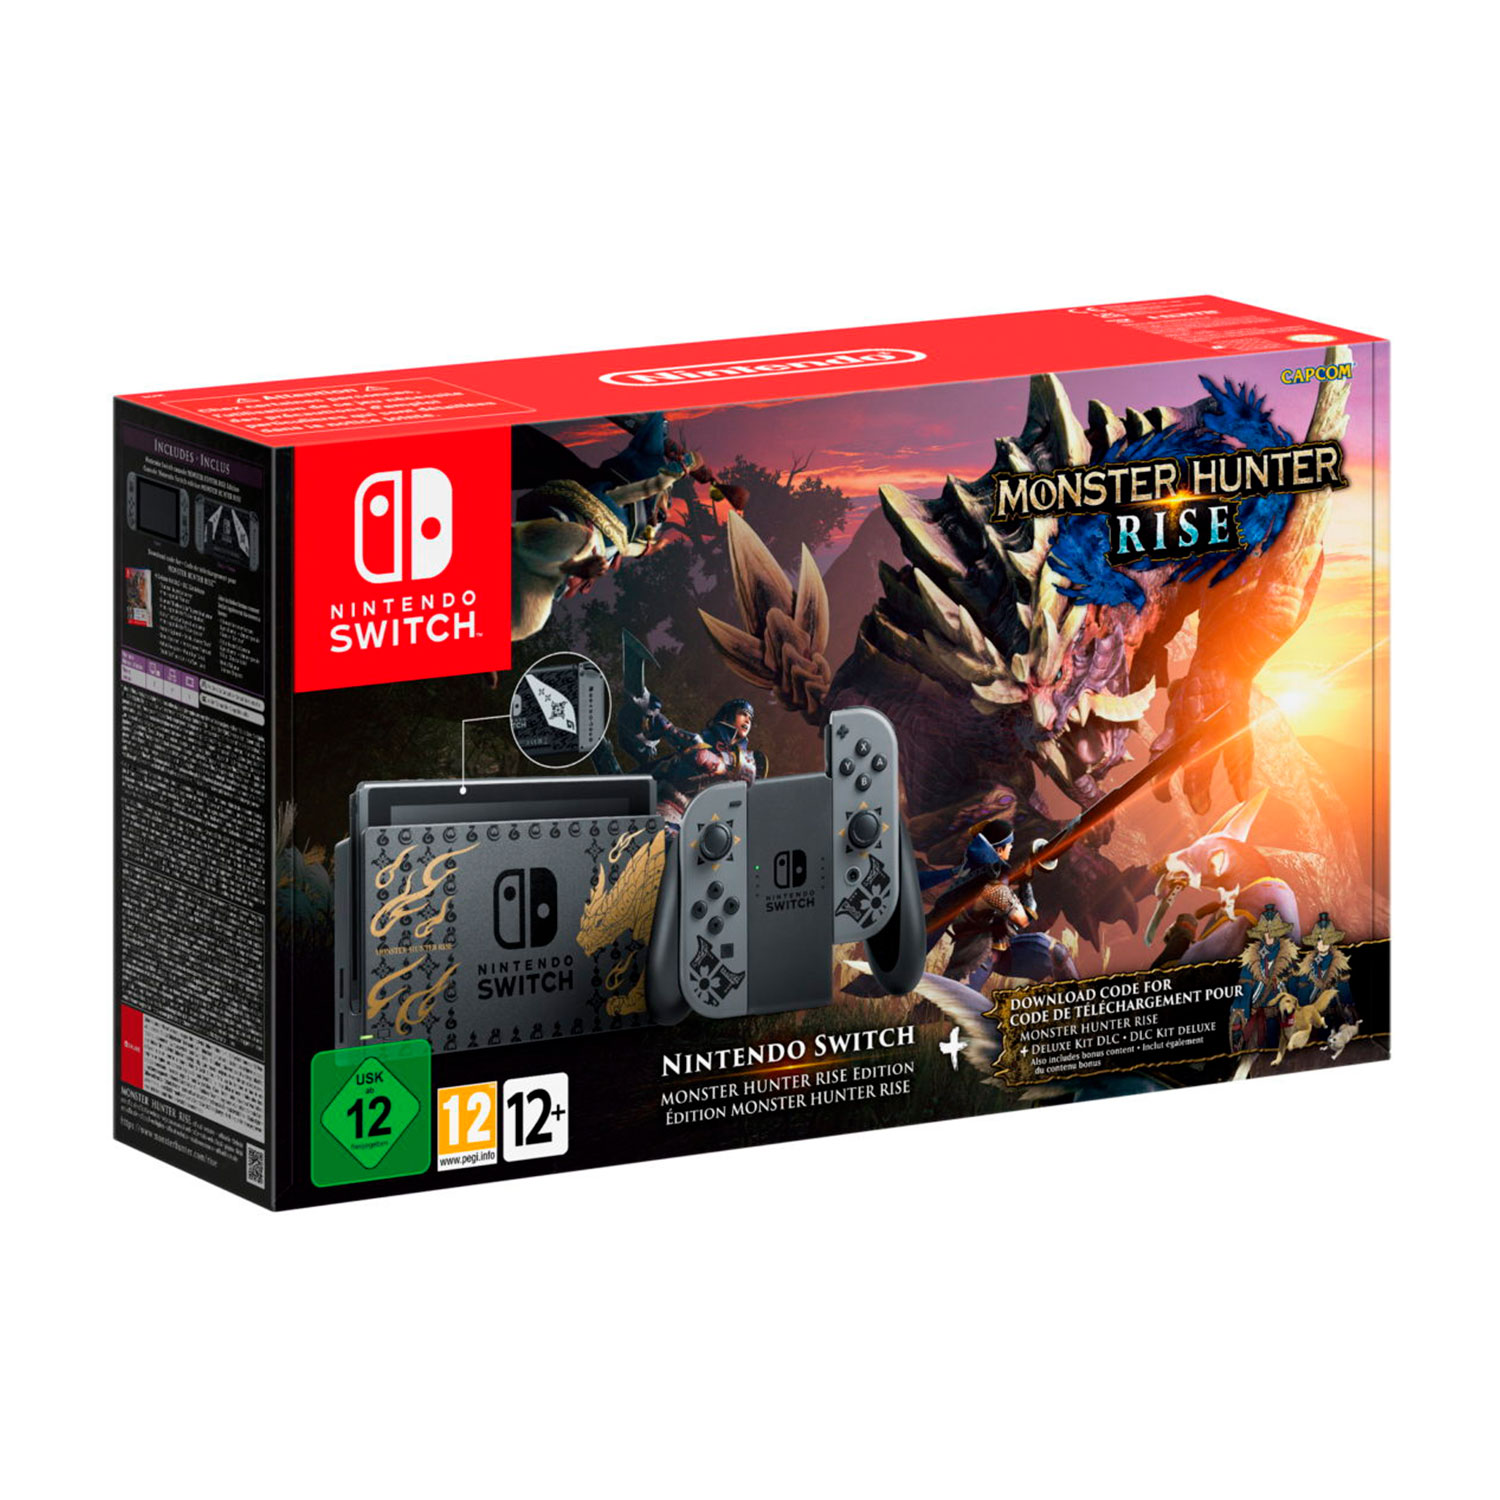 Console Nintendo Switch Monster Hunter Rise 32GB Japão - Cinza (HAD-S-KGALG)